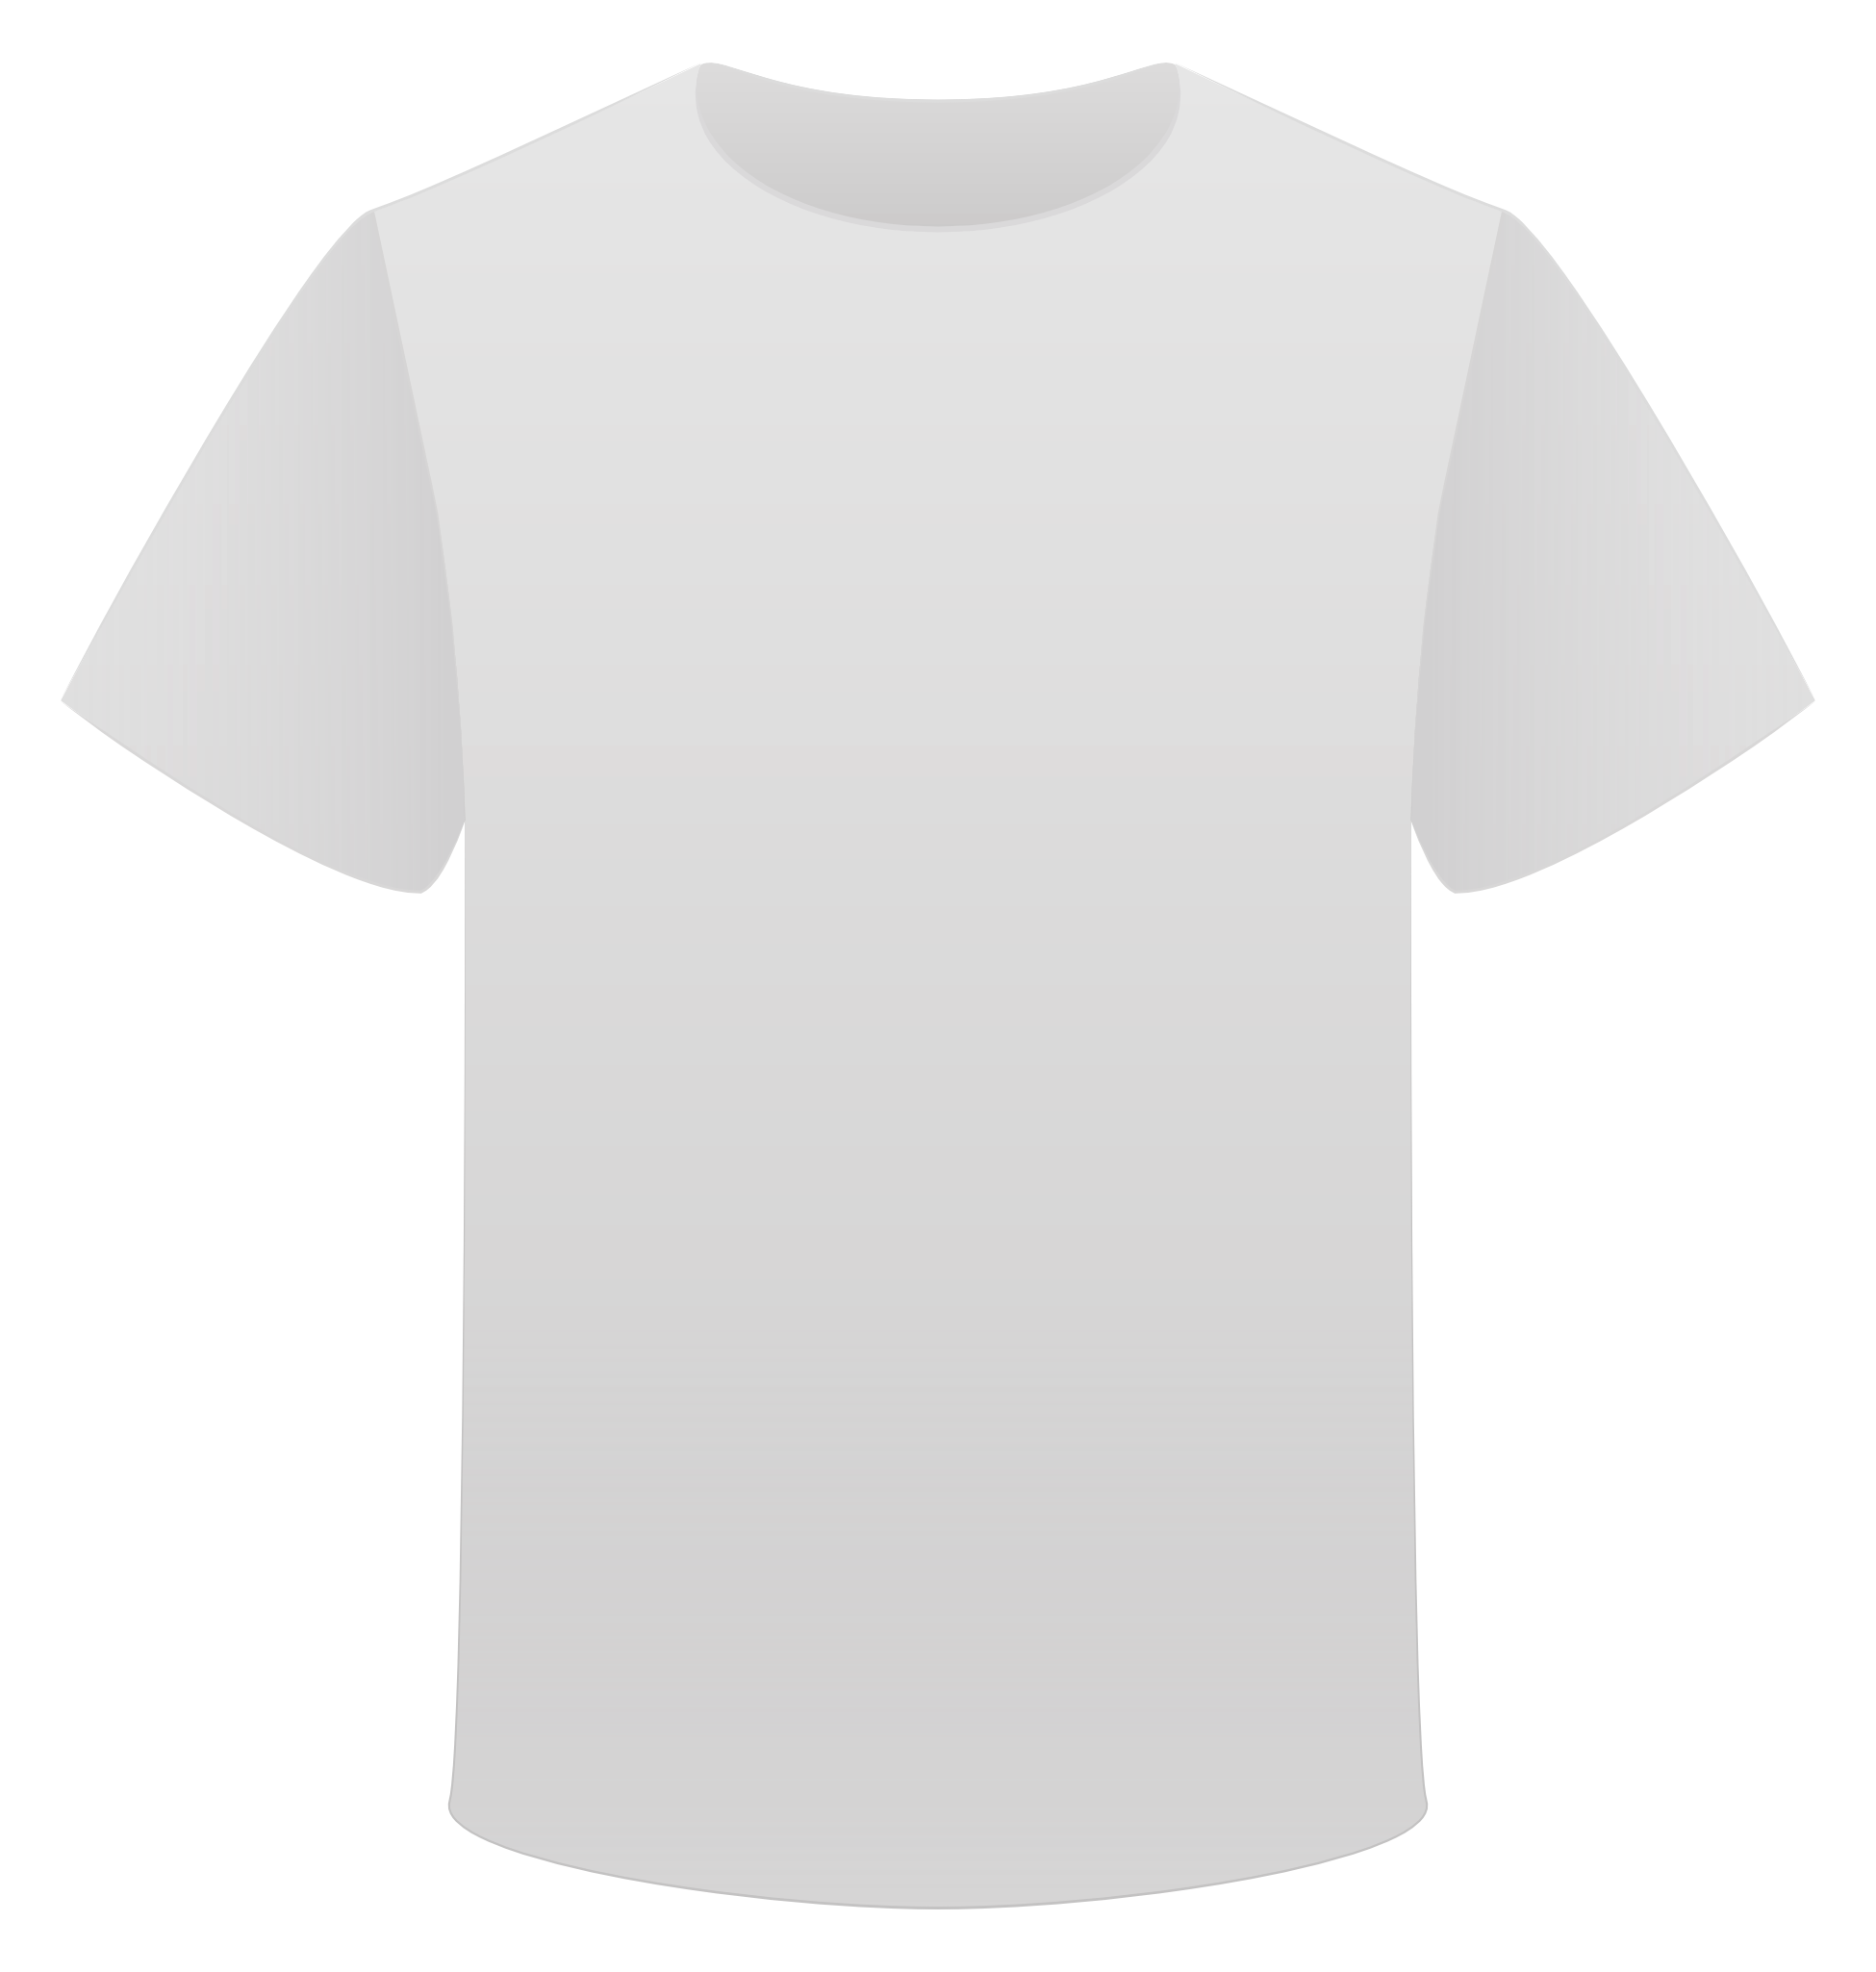 White Shirt Png (104+ images in Collection) Page 2.